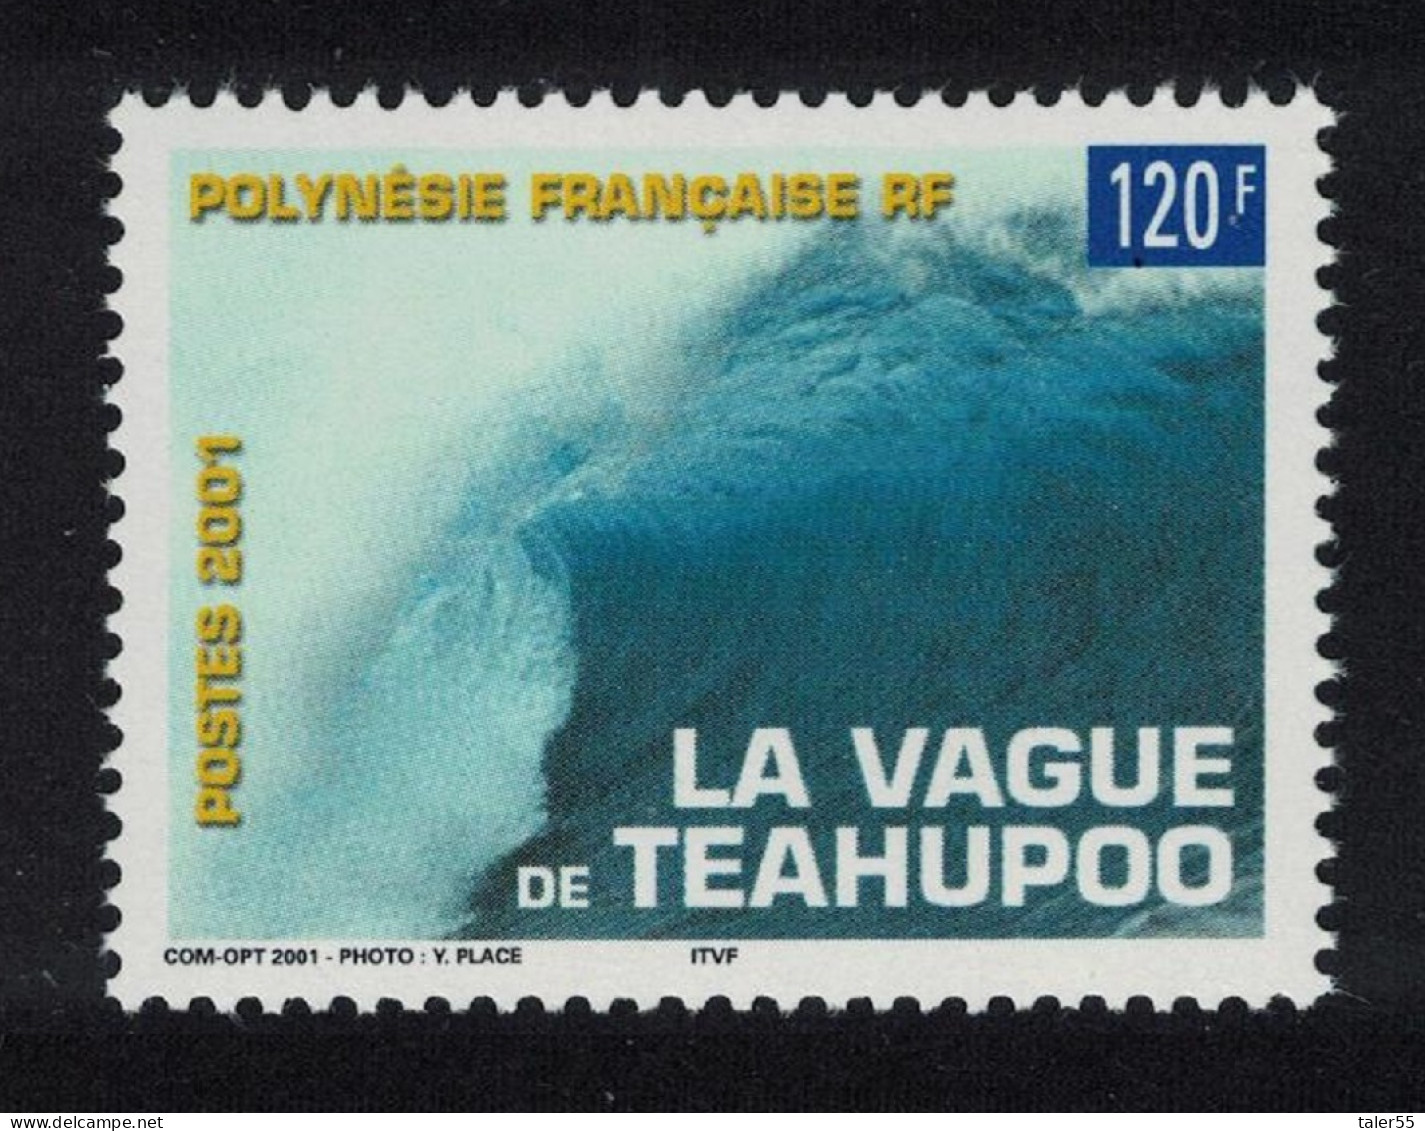 Fr. Polynesia Surfing The Heaviest Wave In The World Teahupoo 2001 MNH SG#907 - Nuovi